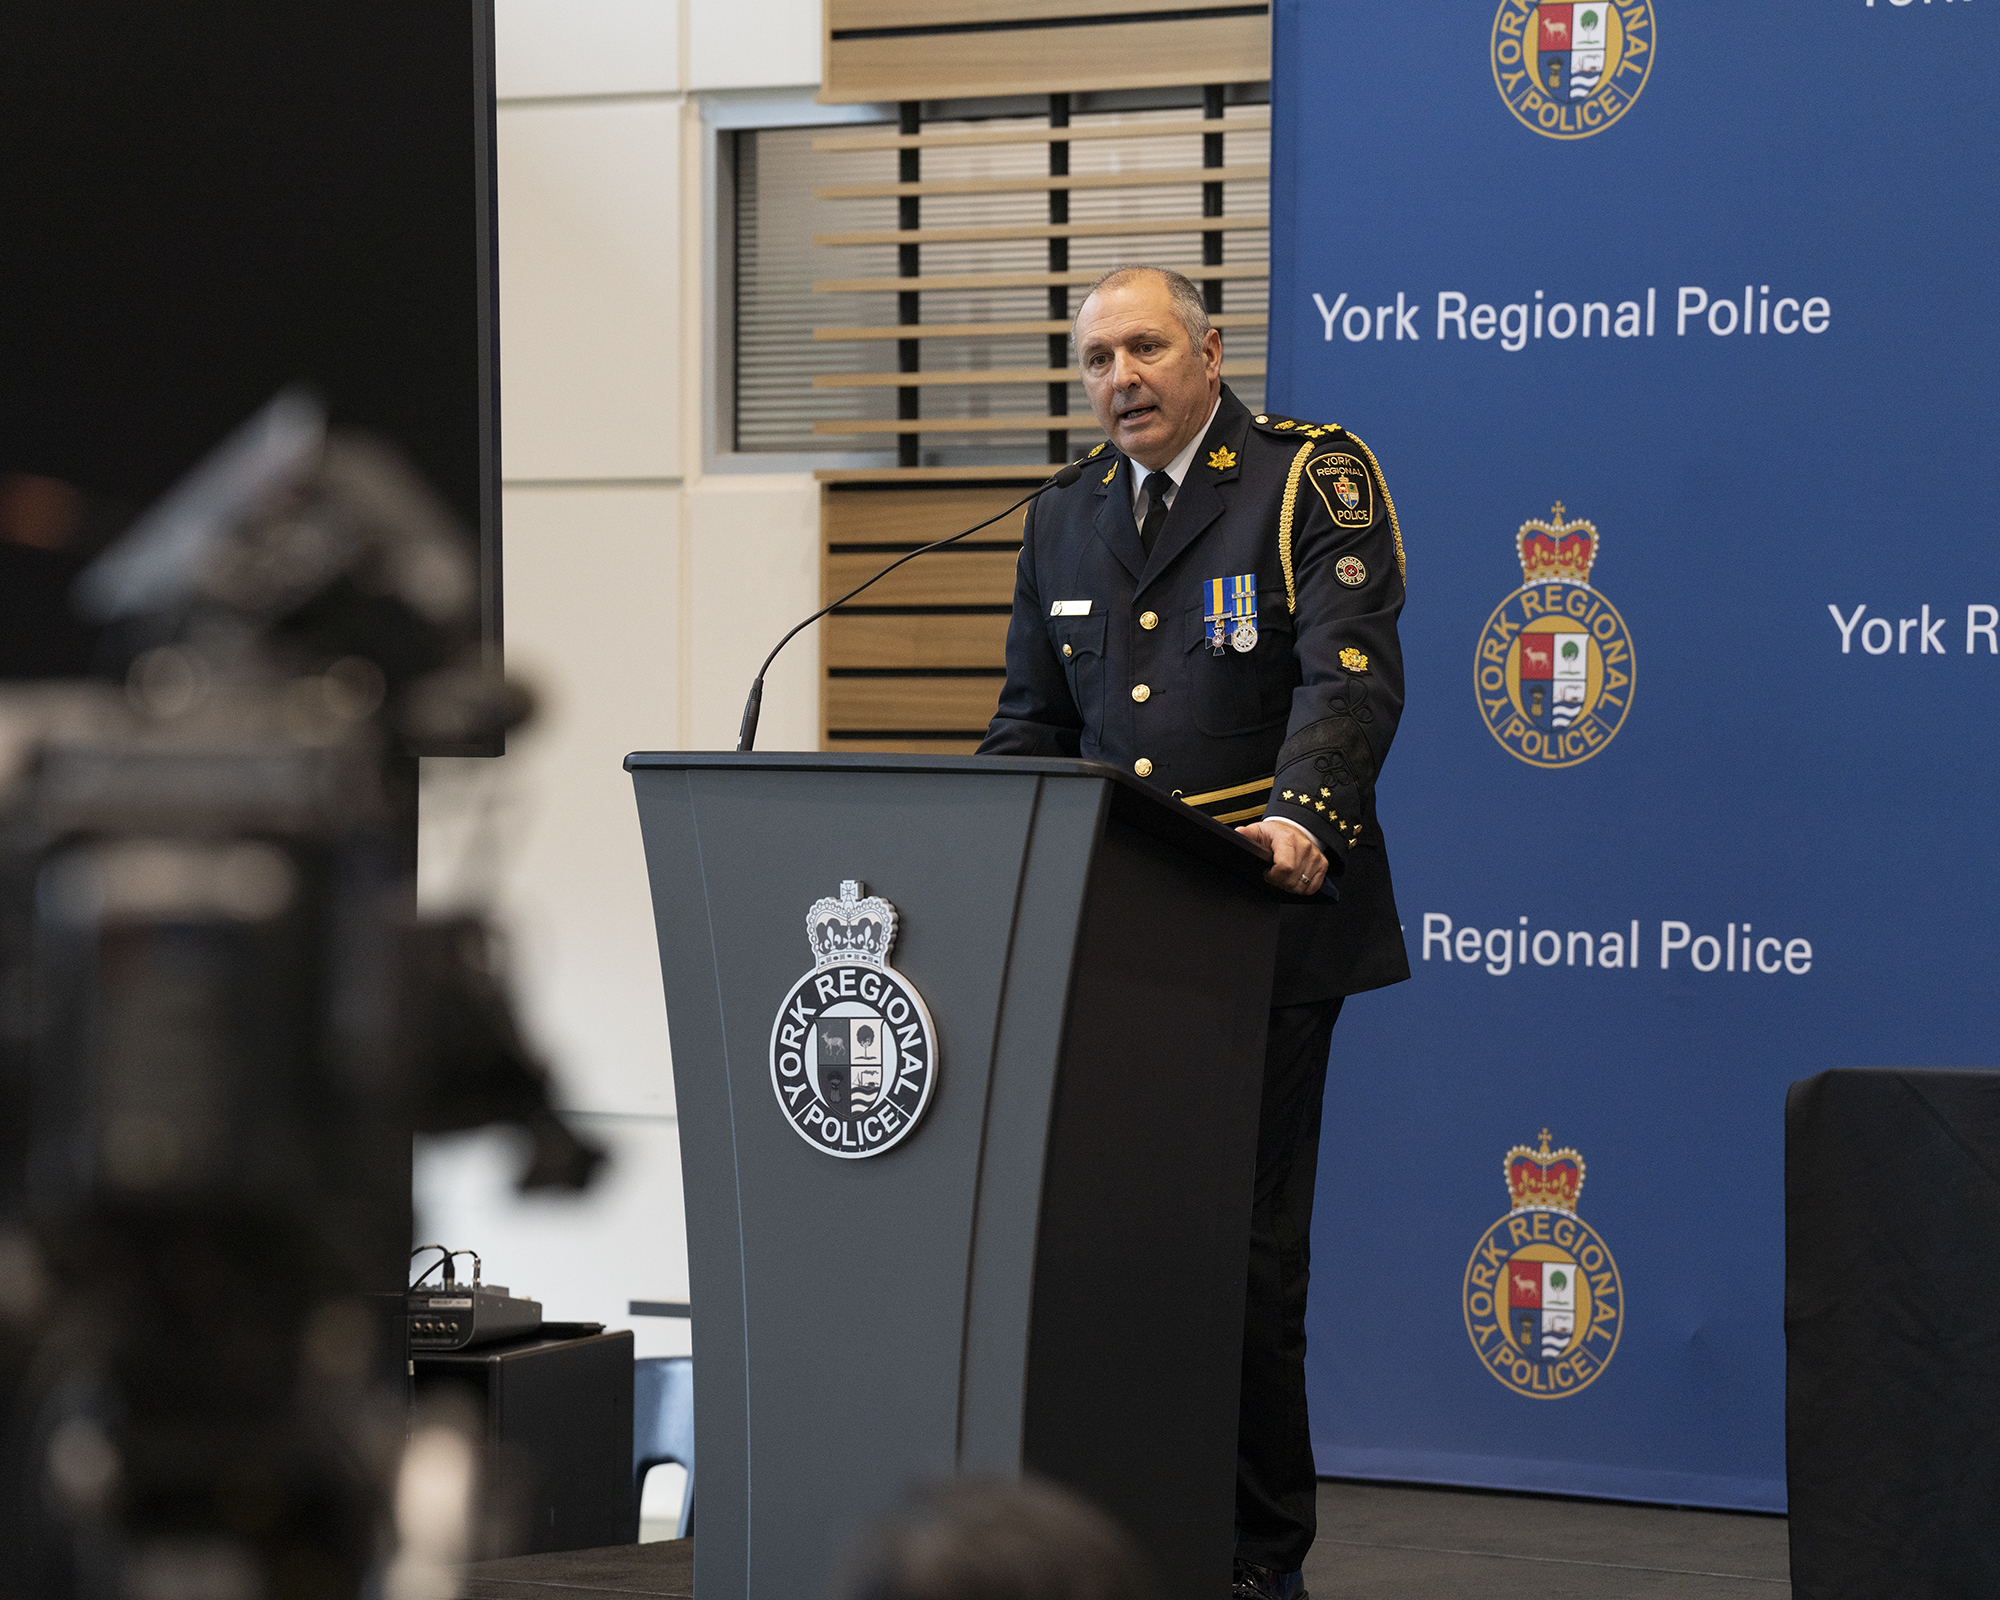 A man in a police uniform speaks at a podium